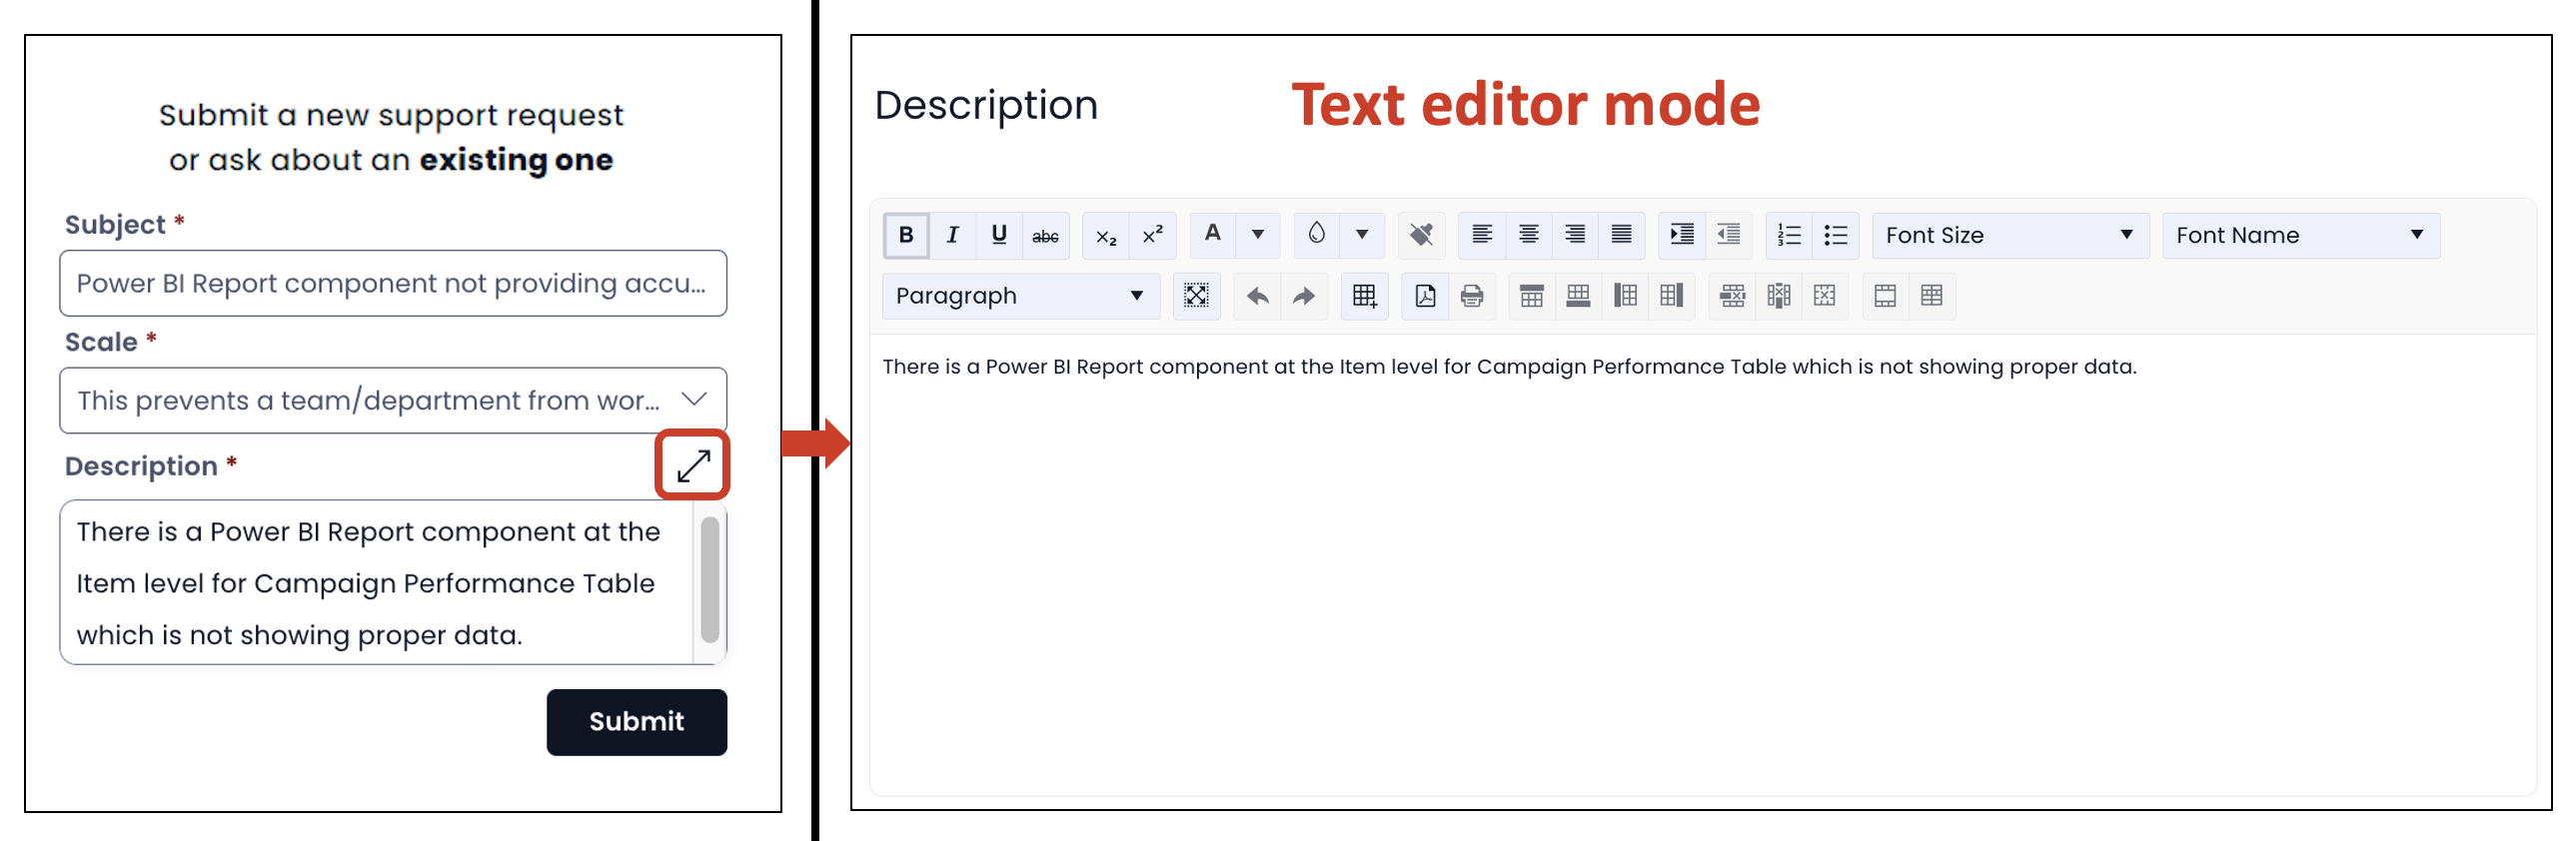 Image showing how to enter text editor mode for Description field